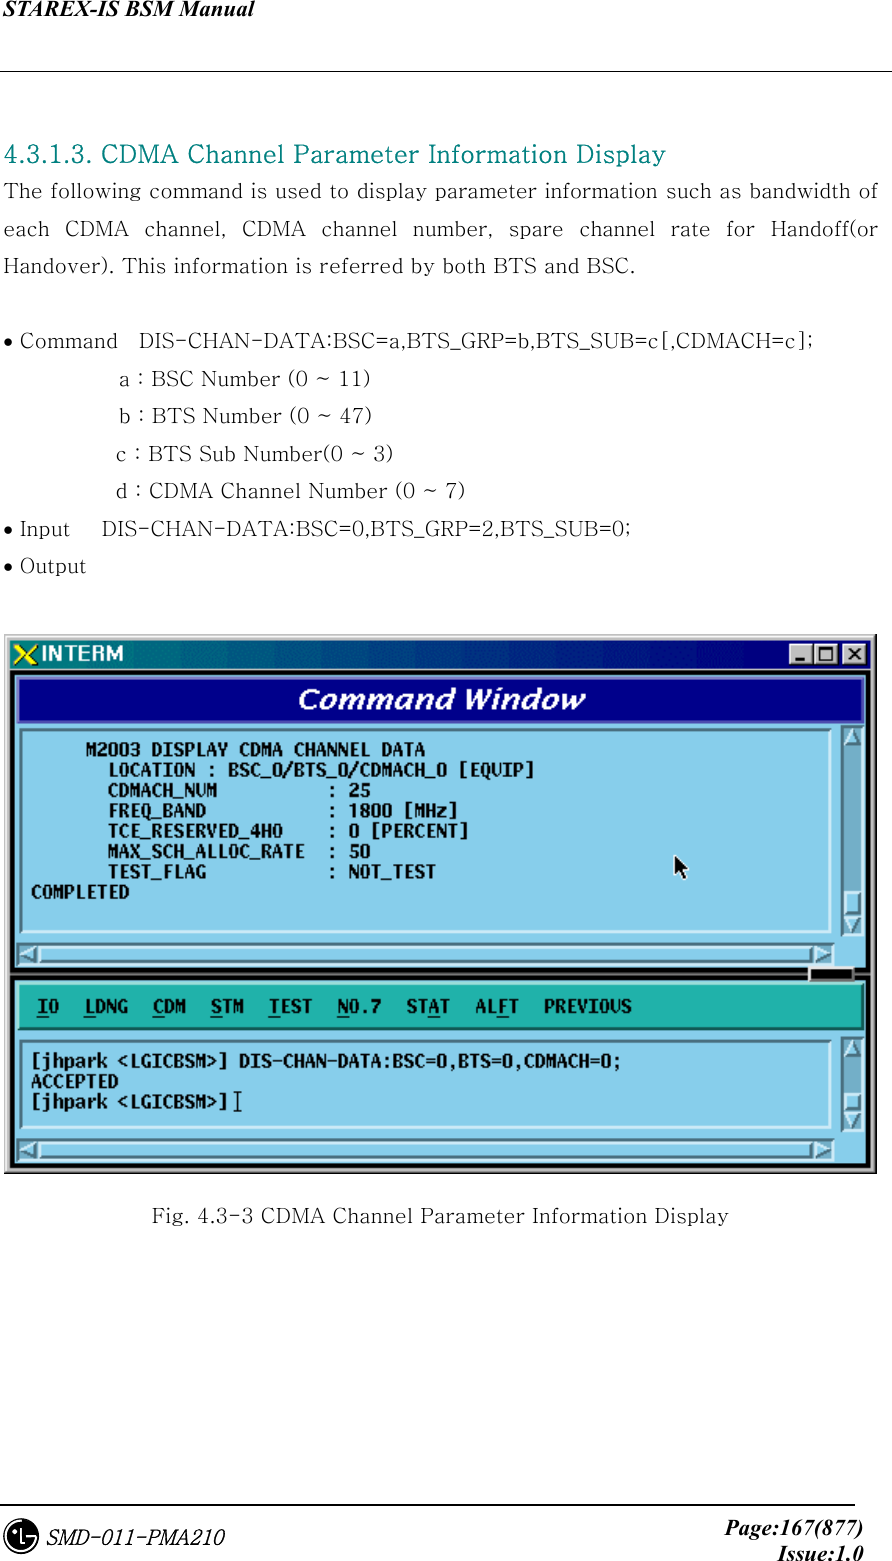 STAREX-IS BSM Manual     Page:167(877)Issue:1.0SMD-011-PMA210  4.3.1.3. CDMA Channel Parameter Information Display The following command is used to display parameter information such as bandwidth of each  CDMA  channel,  CDMA  channel  number,  spare  channel  rate  for  Handoff(or Handover). This information is referred by both BTS and BSC.  • Command    DIS-CHAN-DATA:BSC=a,BTS_GRP=b,BTS_SUB=c[,CDMACH=c];            a : BSC Number (0 ~ 11)            b : BTS Number (0 ~ 47) c : BTS Sub Number(0 ~ 3) d : CDMA Channel Number (0 ~ 7) • Input   DIS-CHAN-DATA:BSC=0,BTS_GRP=2,BTS_SUB=0; • Output   Fig. 4.3-3 CDMA Channel Parameter Information Display 